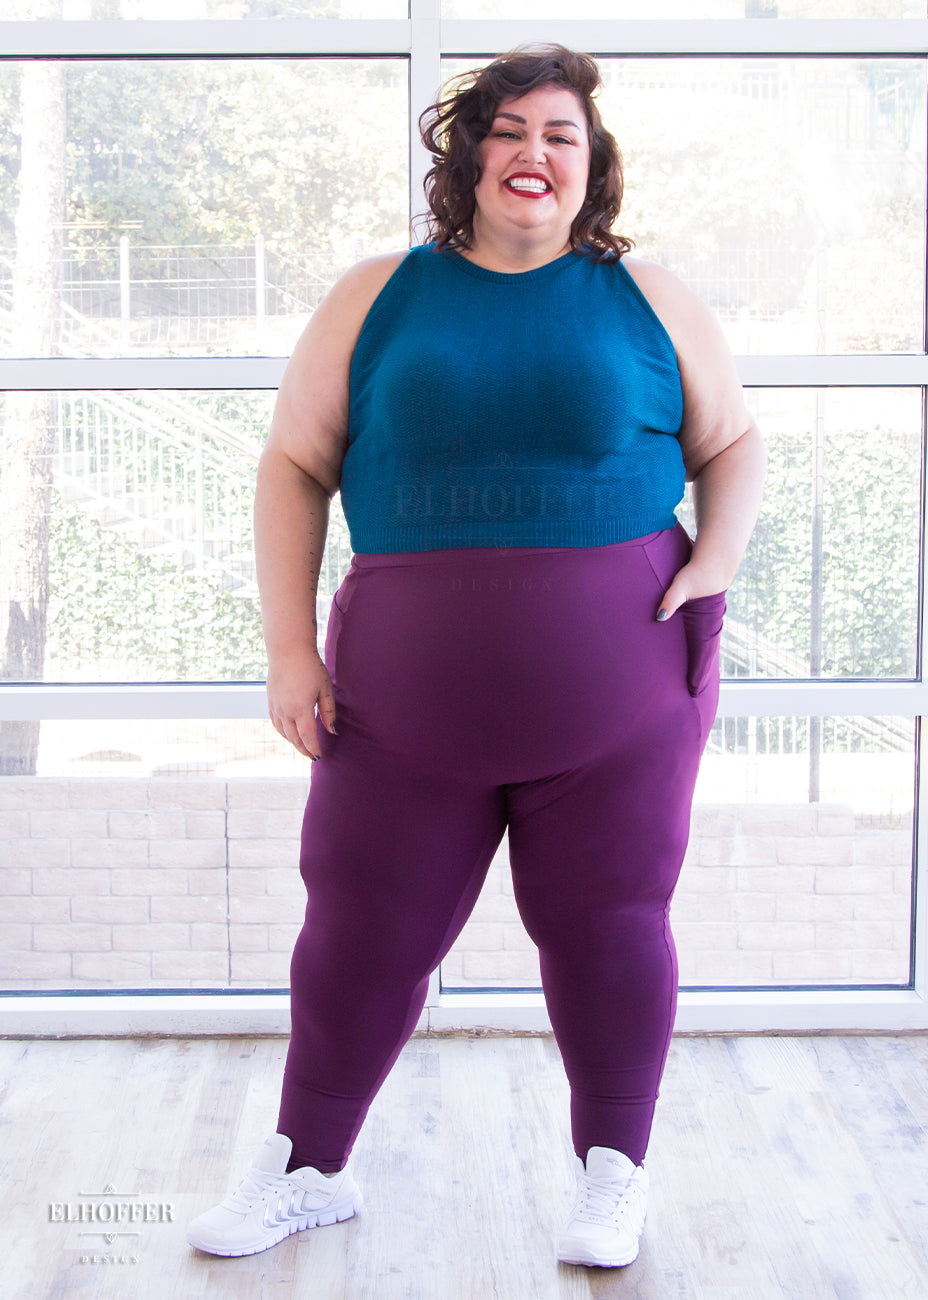 Kristen, a size 3XL olive skinned model with short dark brown hair, is wearing a pair of high waisted leggings with a seamless front and side seam pockets in plum.